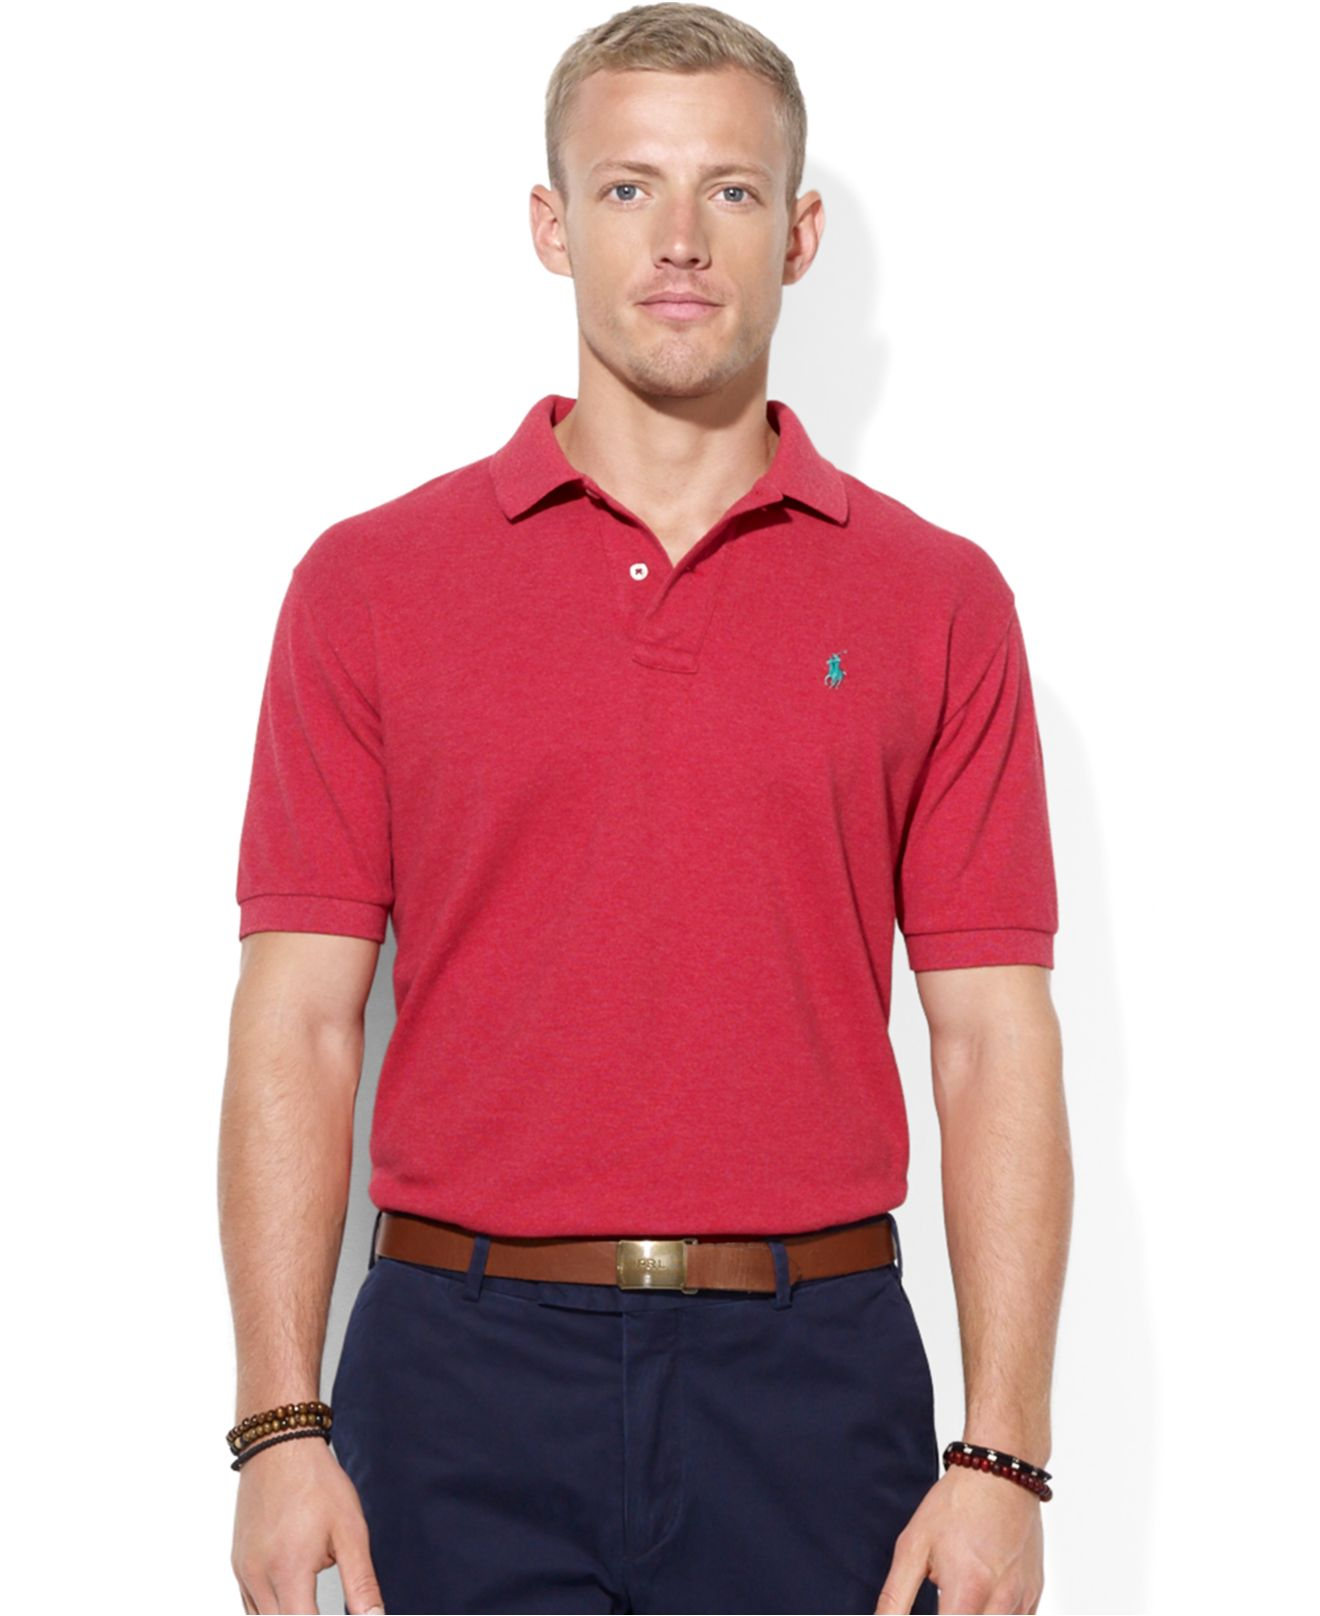 Polo Ralph Lauren Red Classic Fit Mesh Polo Shirt Product 1 21066518 0 354816433 Normal 